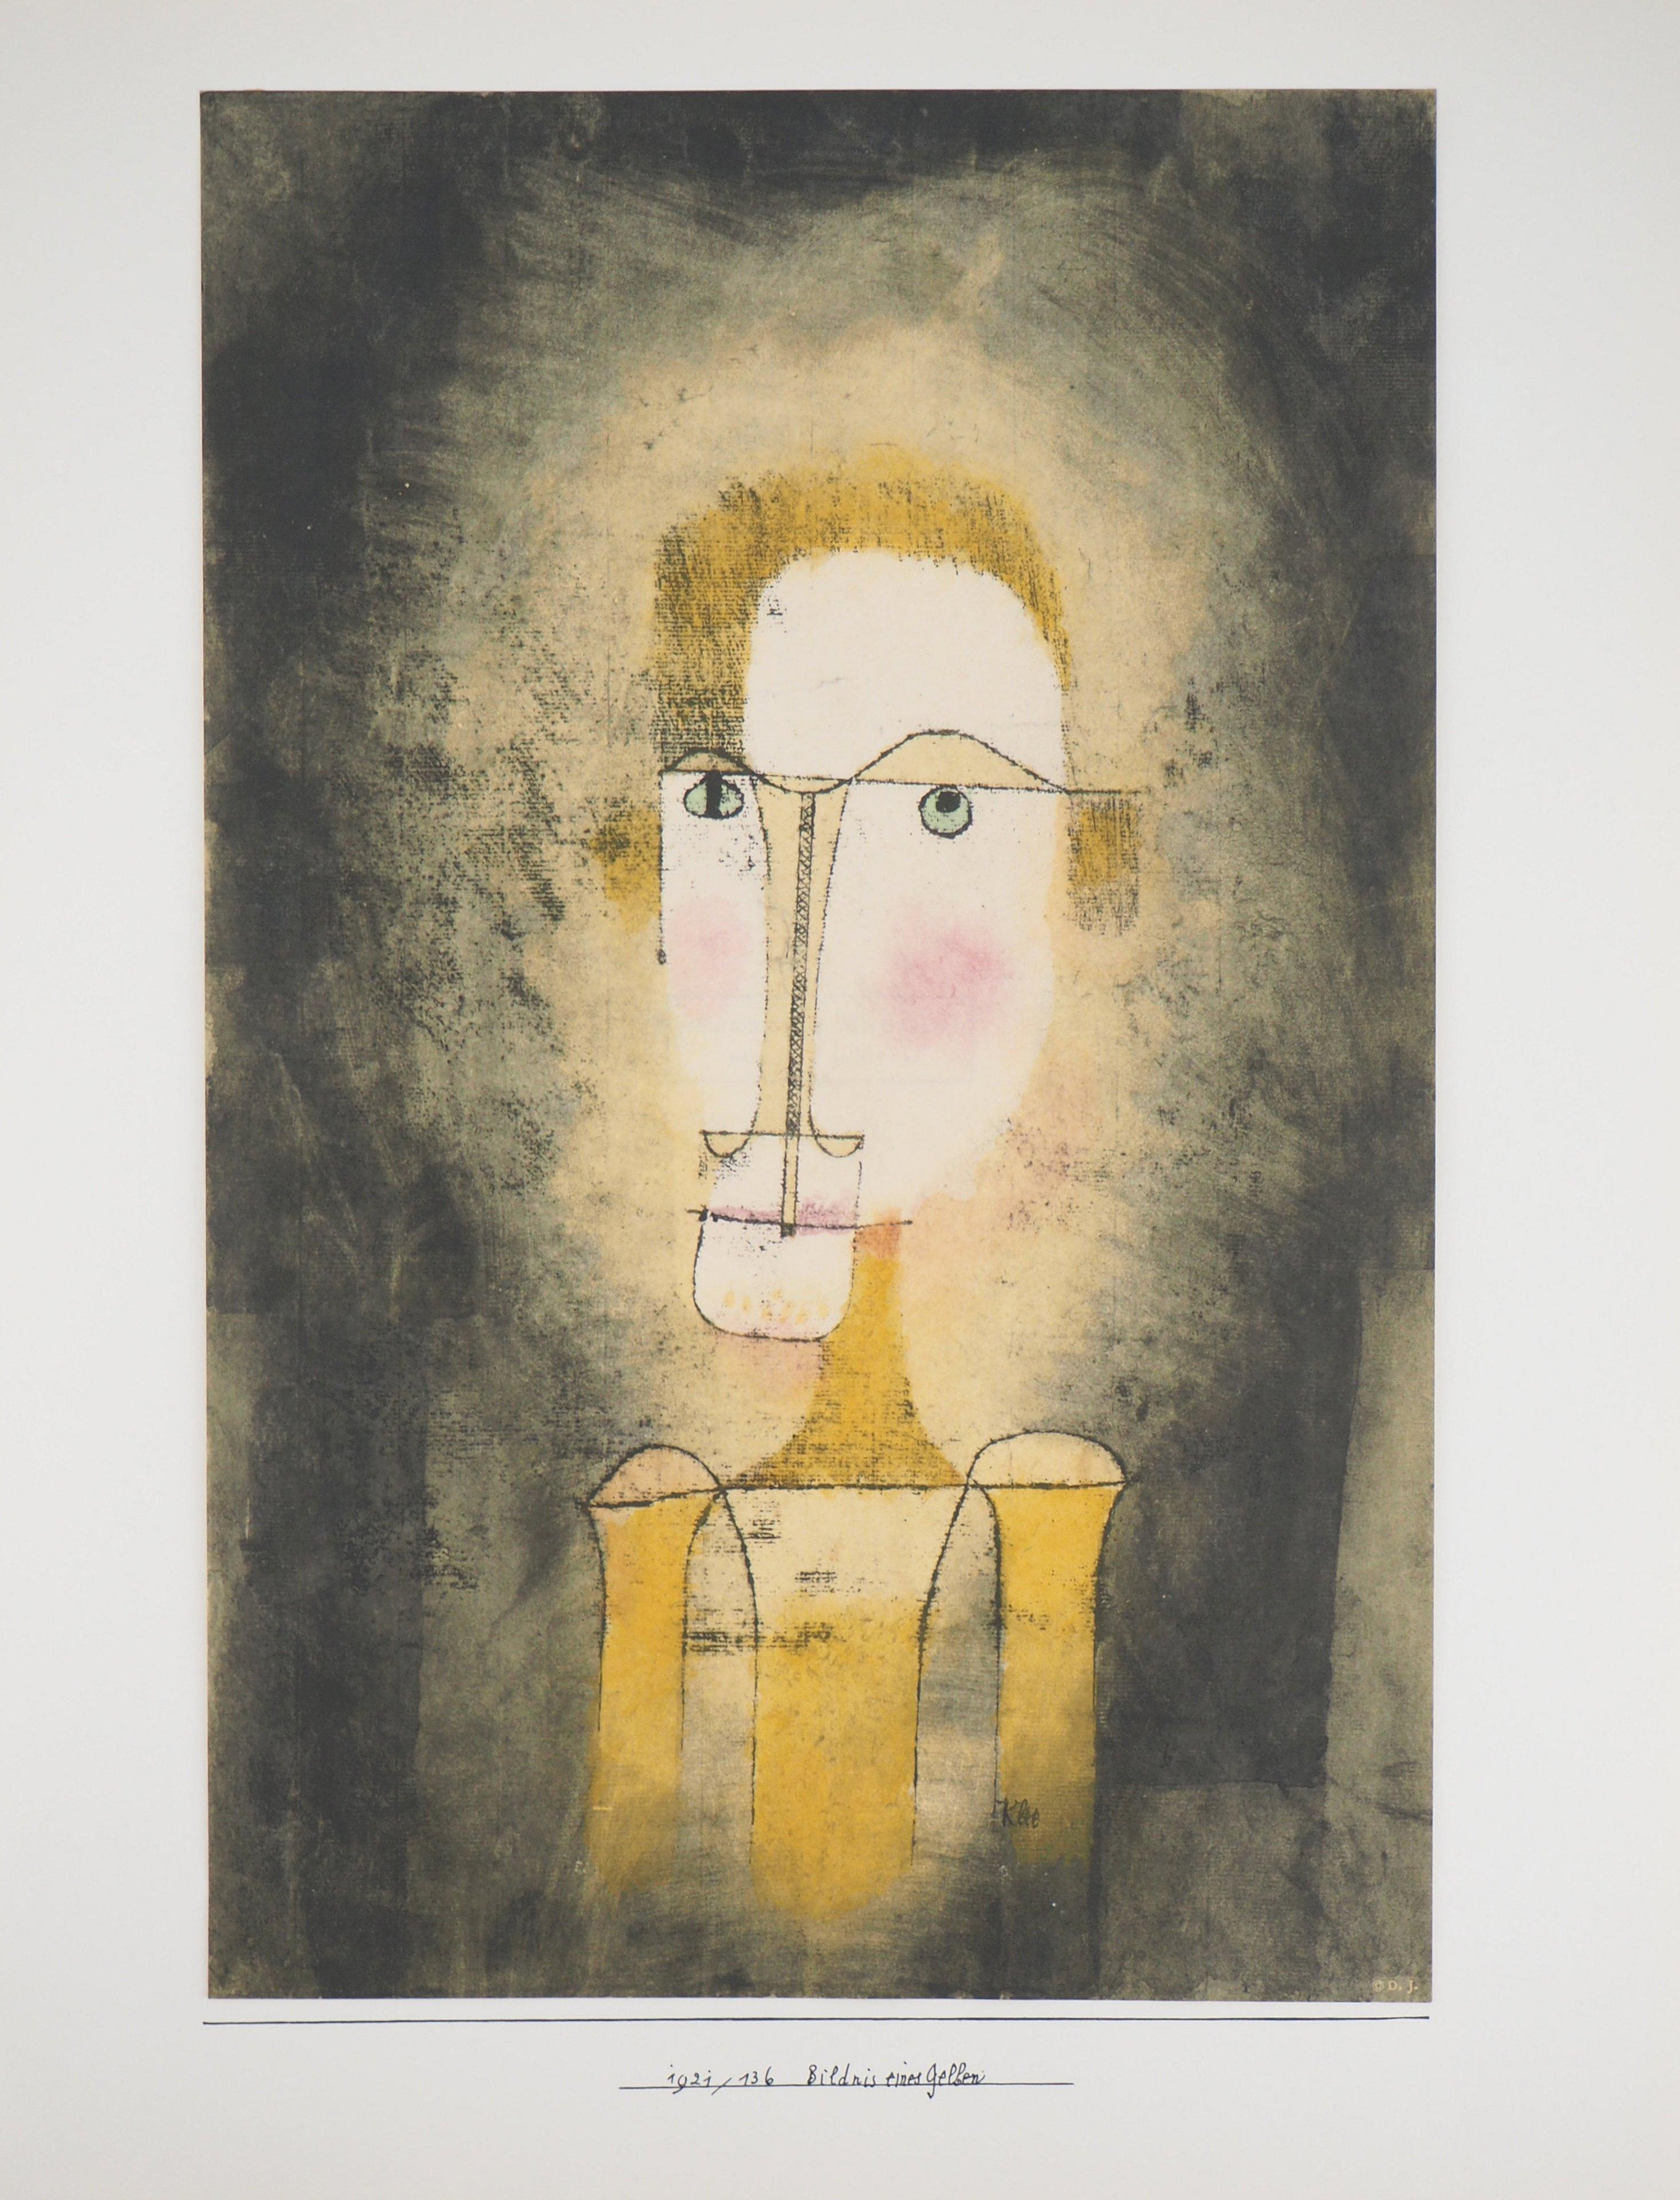 Paul KLEE (after)
Portrait of a Yellow

Lithograph and stencil (Jacomet process), on canson paper
Printed signature in the plate
50 x 38.2 cm (19.6 x 14.9 in)

INFORMATION : This lithograph was edited in 1964 by Galerie Berggruen in collaboration